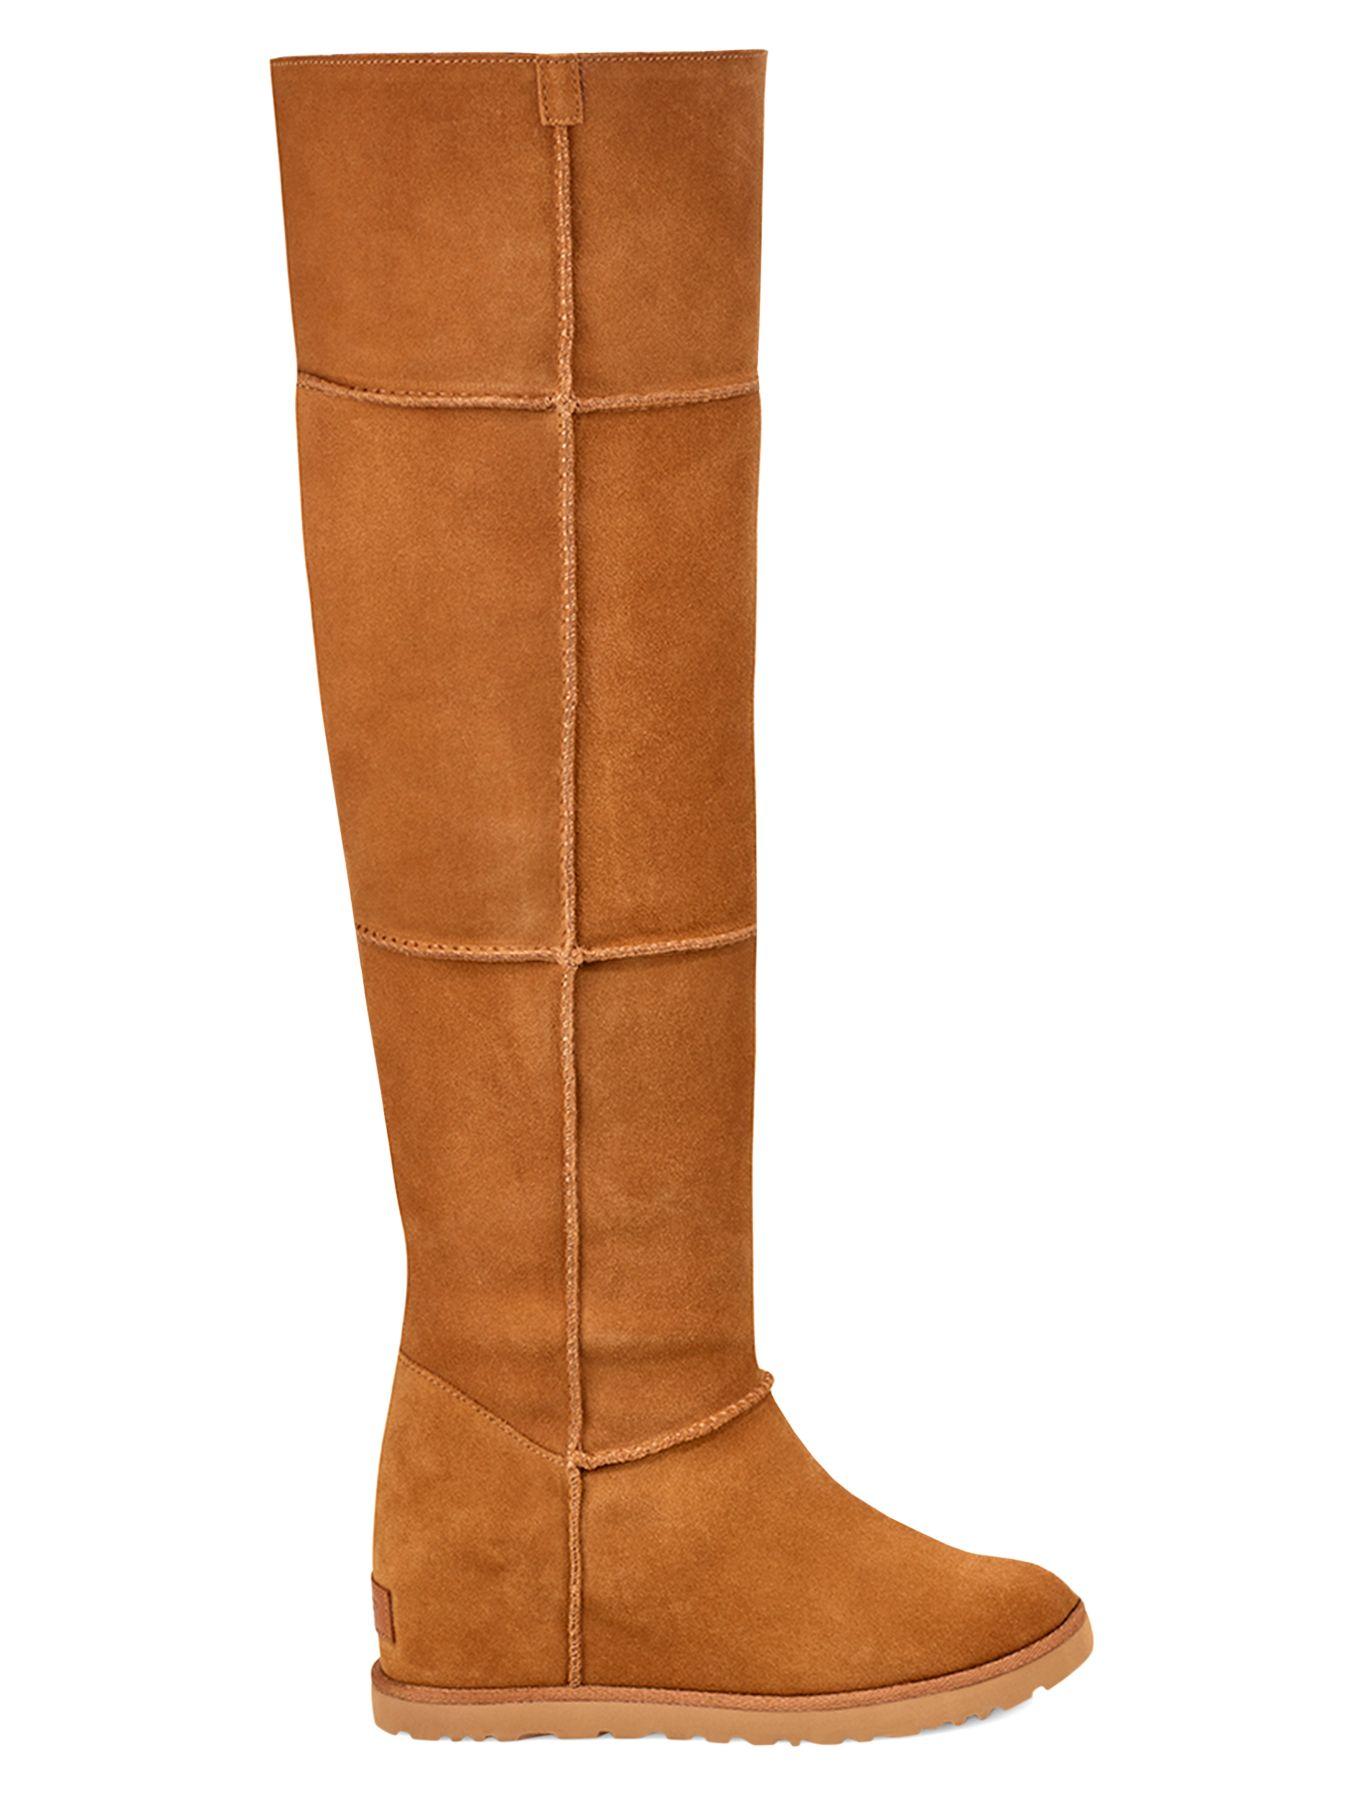 UGG Synthetic Classic Femme Over-the-knee Boots in Chestnut (Brown) - Lyst